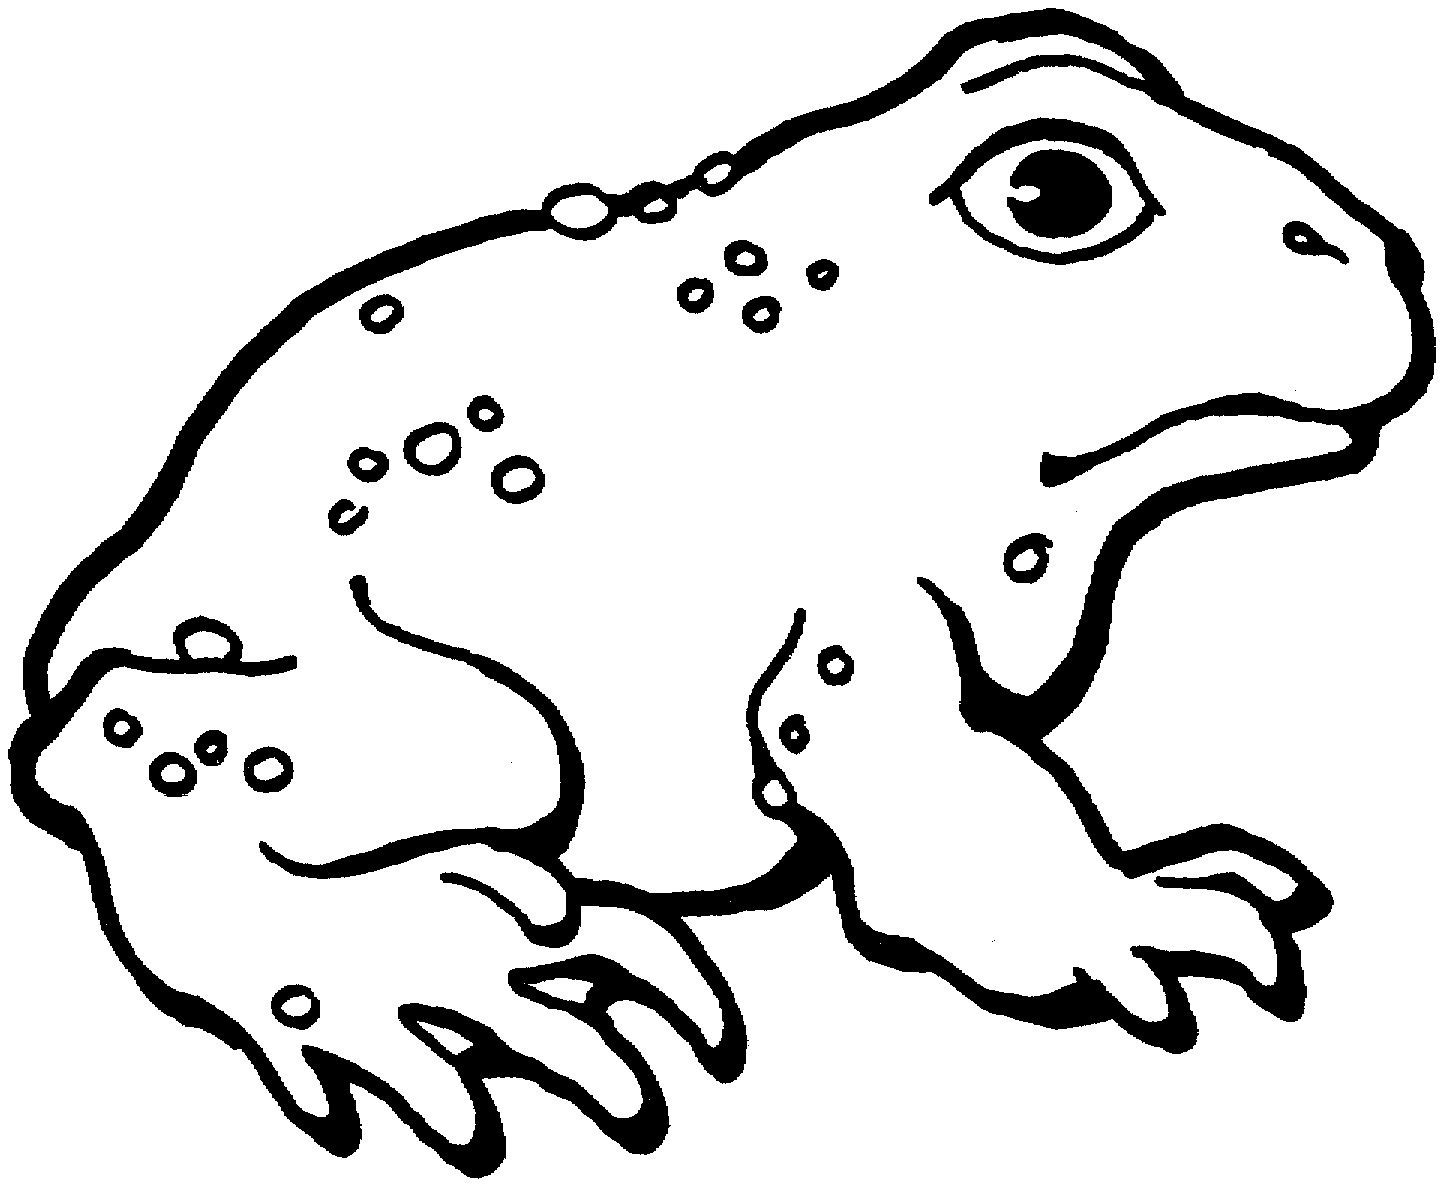 Cane Toad coloring #18, Download drawings